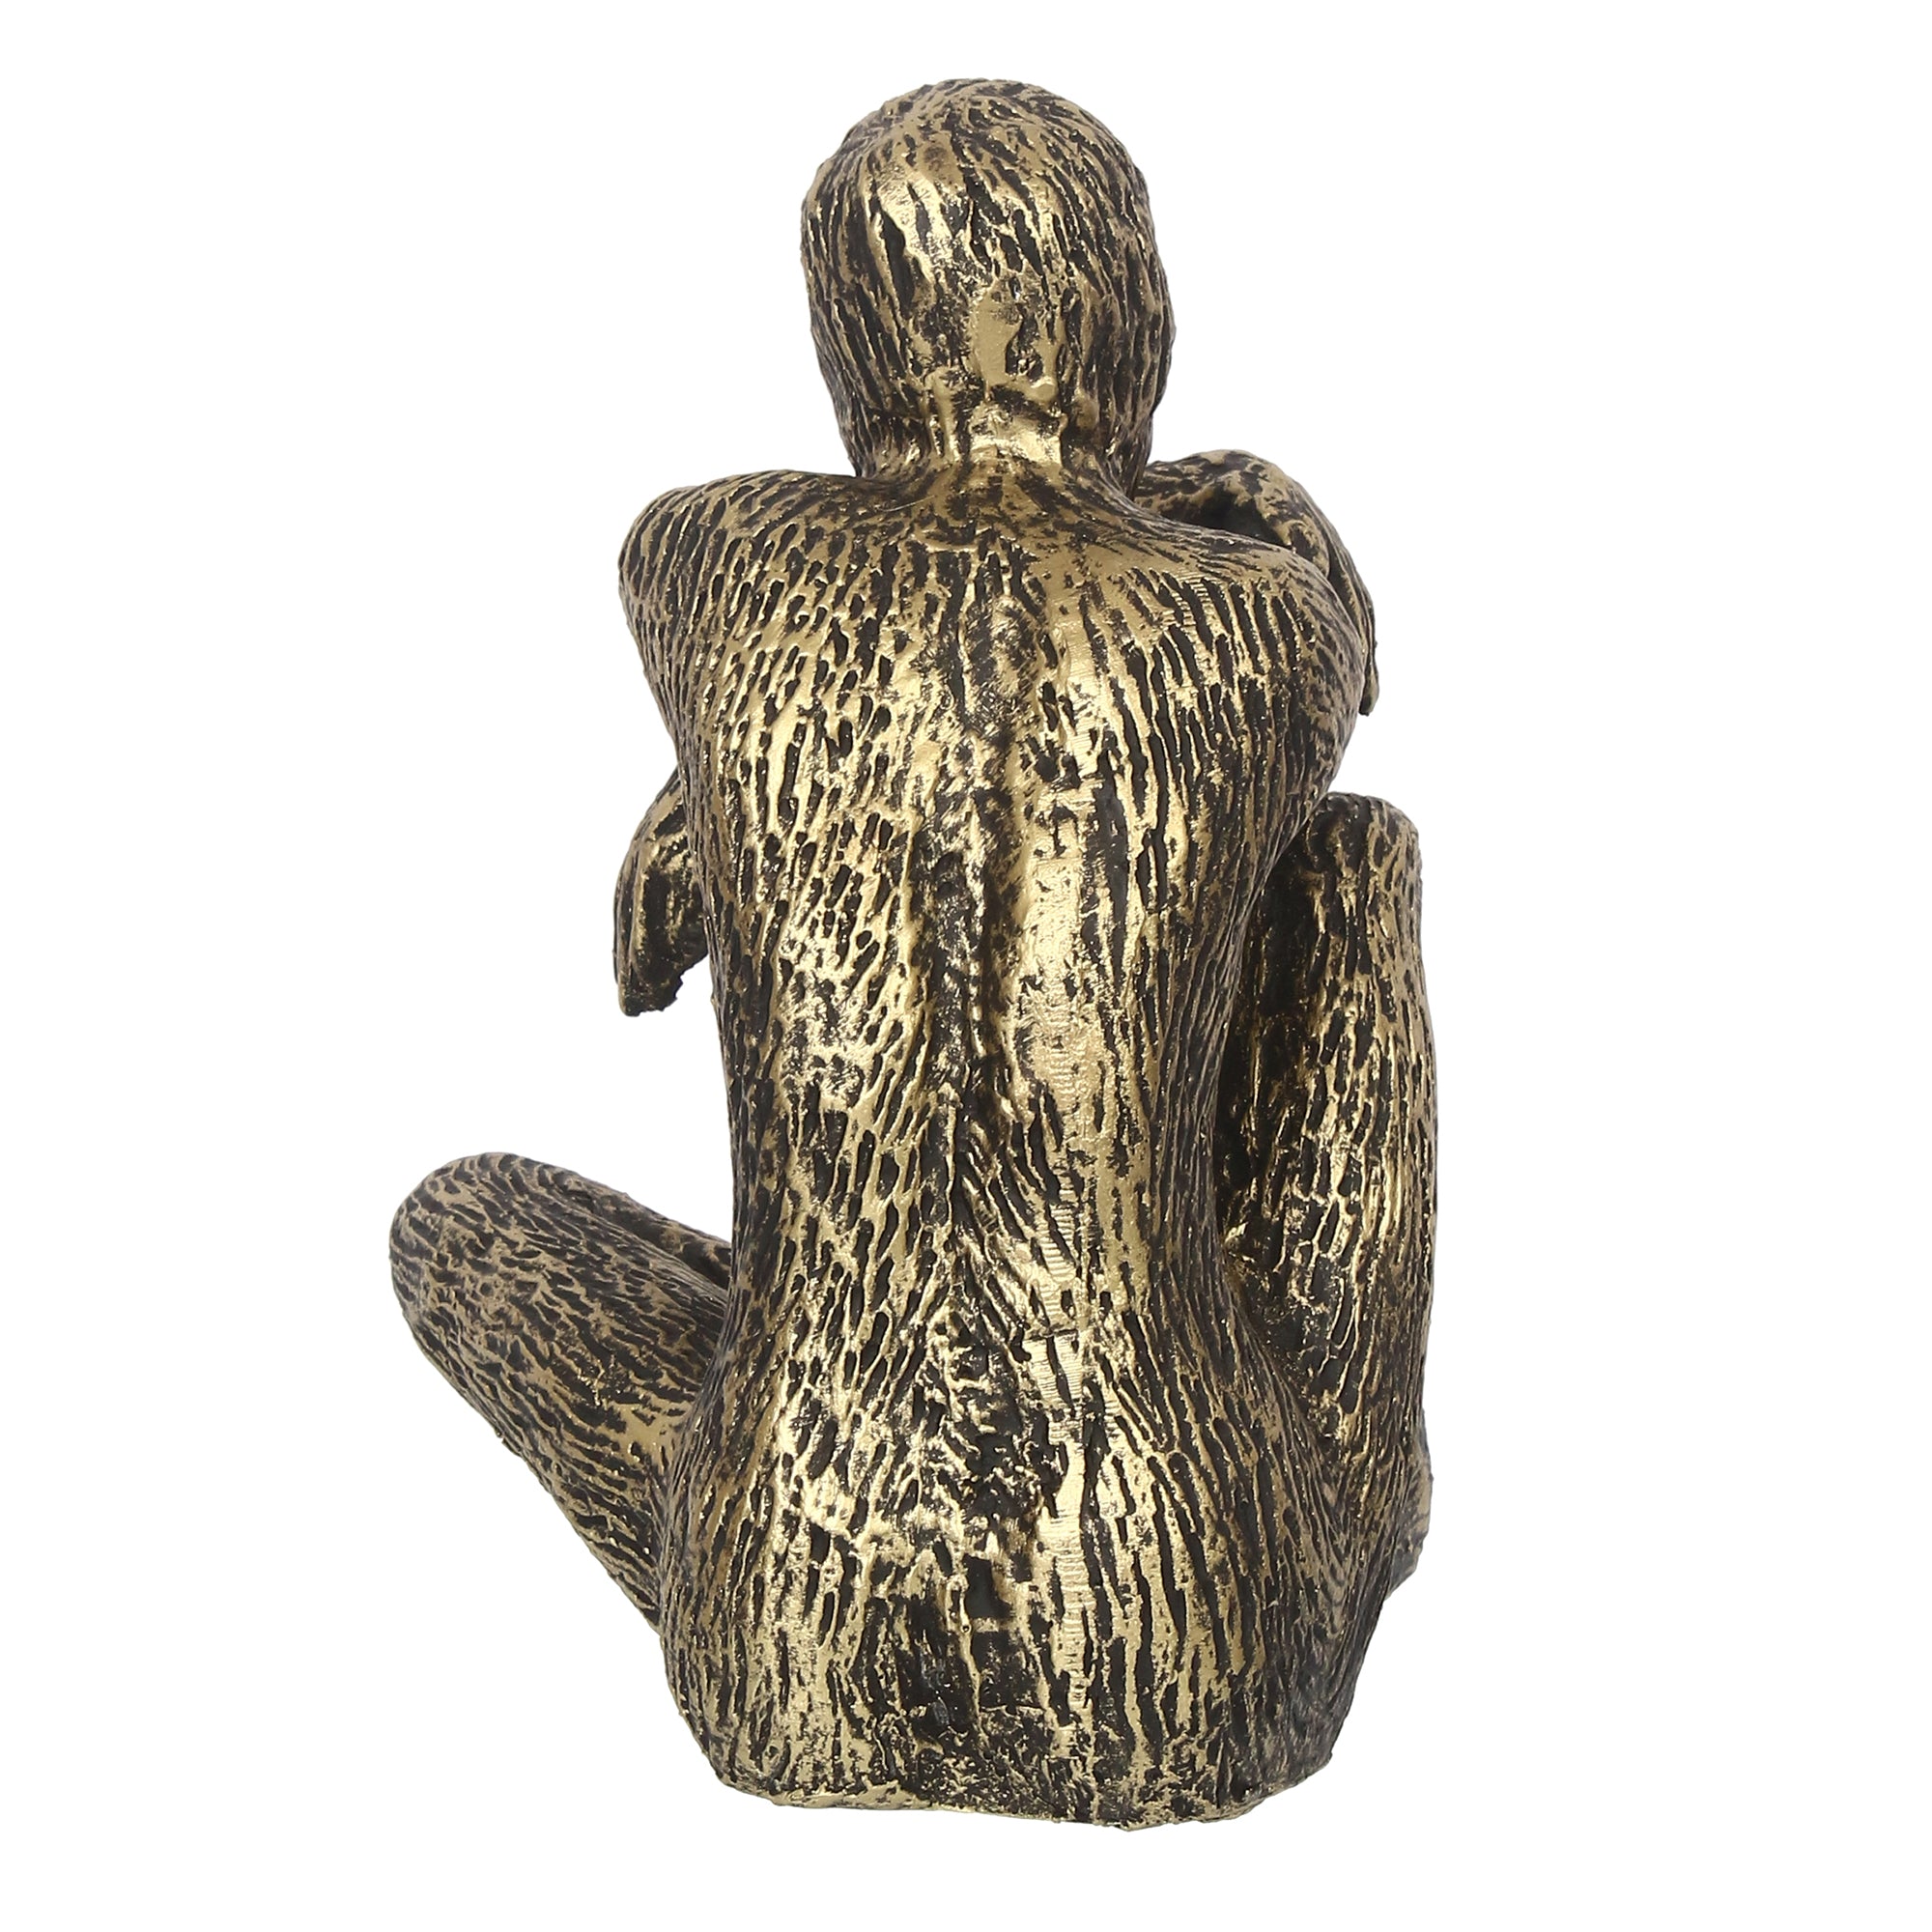 Golden and Black Polyresin Man Figurine Sitting in Thinking Position 5